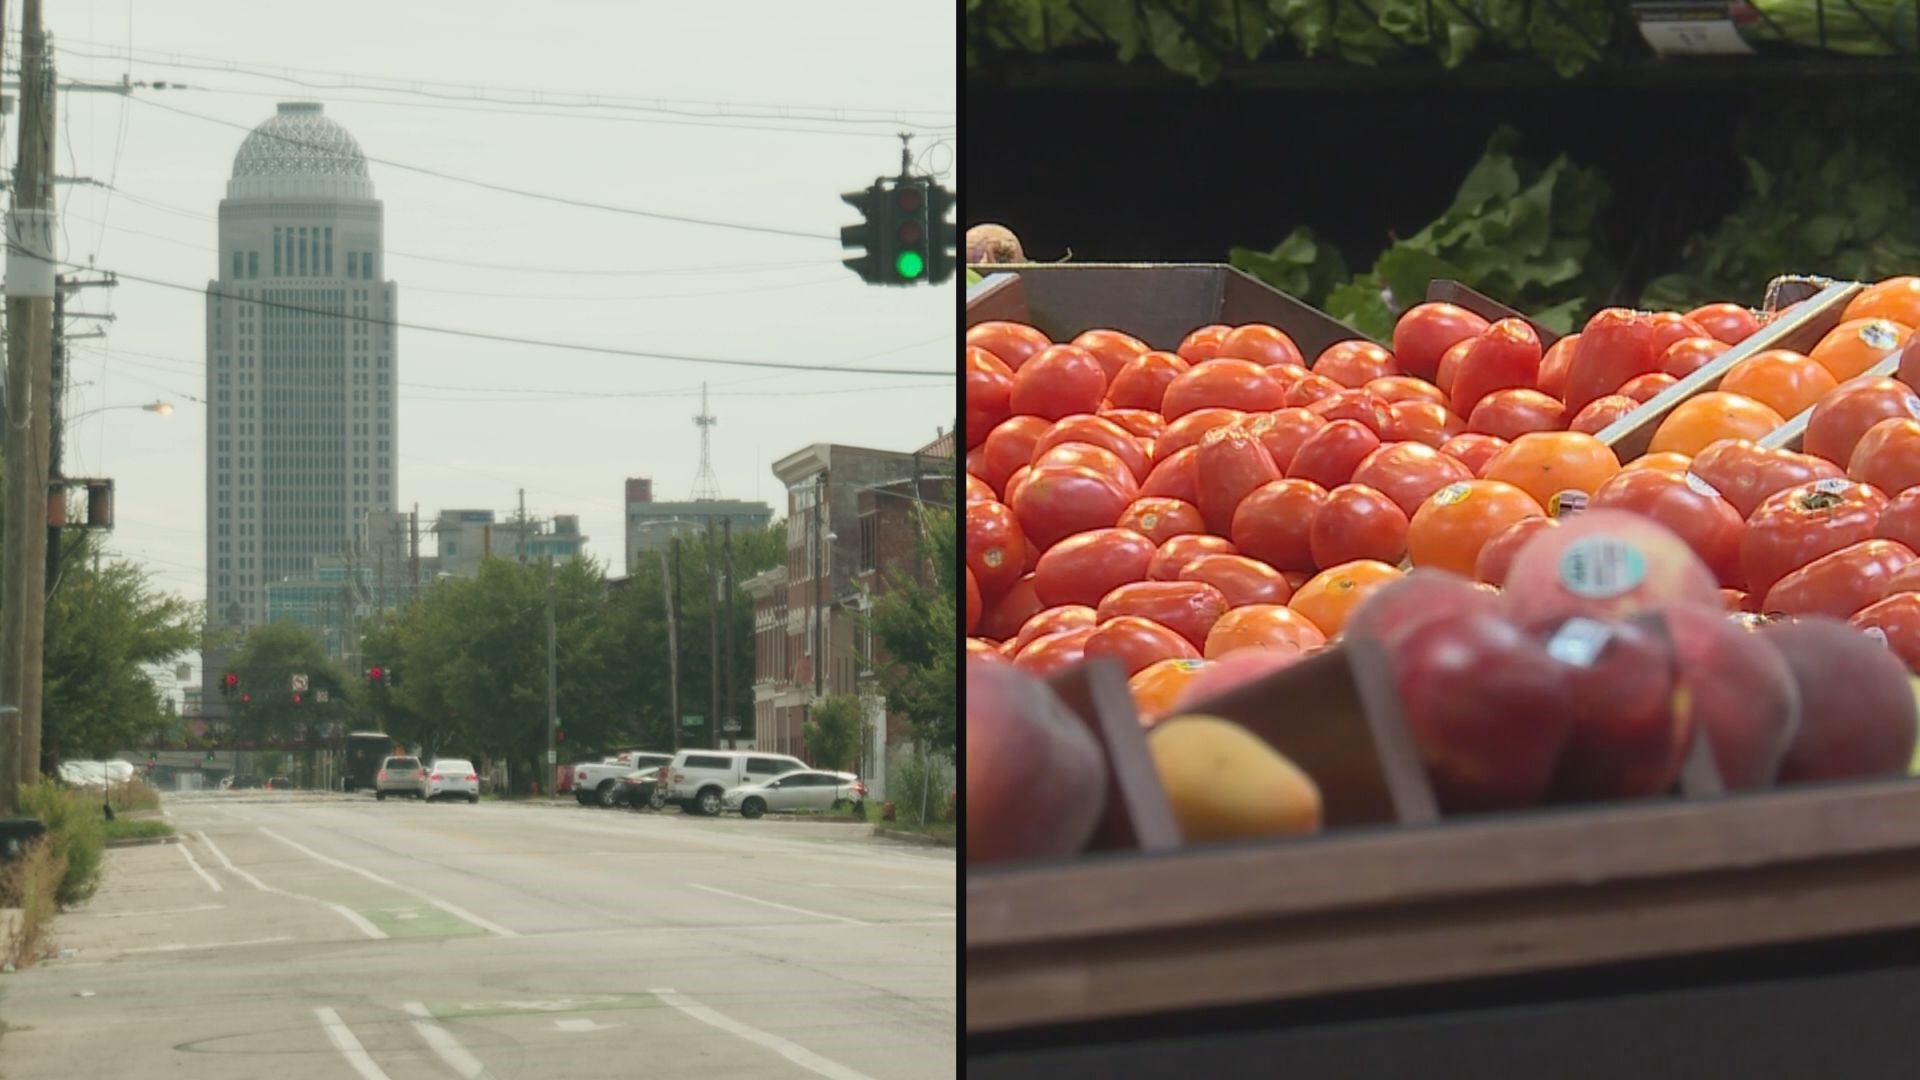 As part of #GiveForGoodLou, Black Lives Matter organized a volunteer day in support of Black Market Kentucky, a sustainable Black-owned grocery story opening in Wes